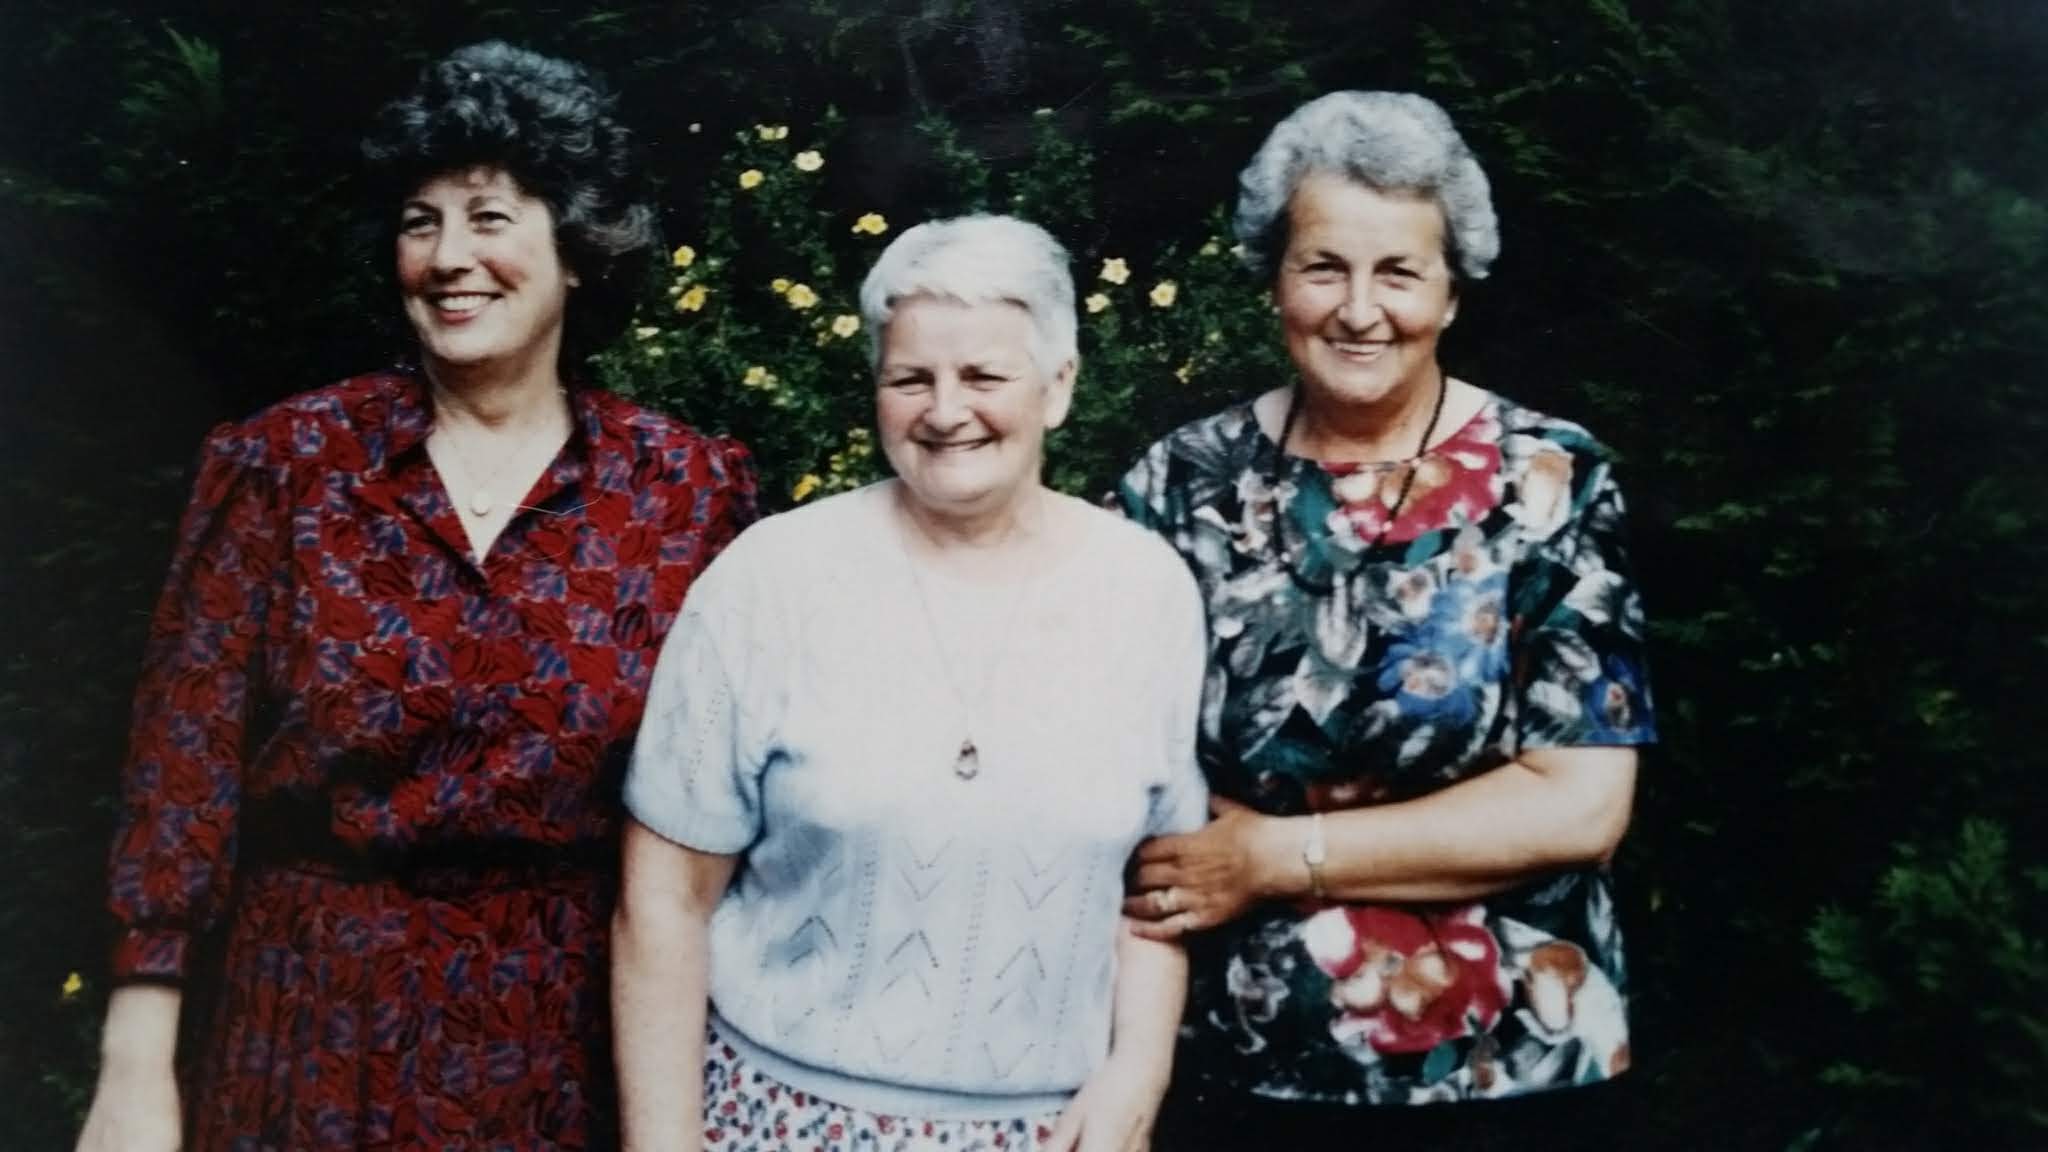 Geordie Burrell's Lassies, July 1989, Linked To: <a href='i455.html' >George Burrell *</a> and <a href='i410.html' >Mary (May) Geddes MacGregor Burrell</a> and <a href='i411.html' >Sheila MacGregor Burrell</a> and <a href='i452.html' >Agnes (Nessie) Cowan Burrell *</a>